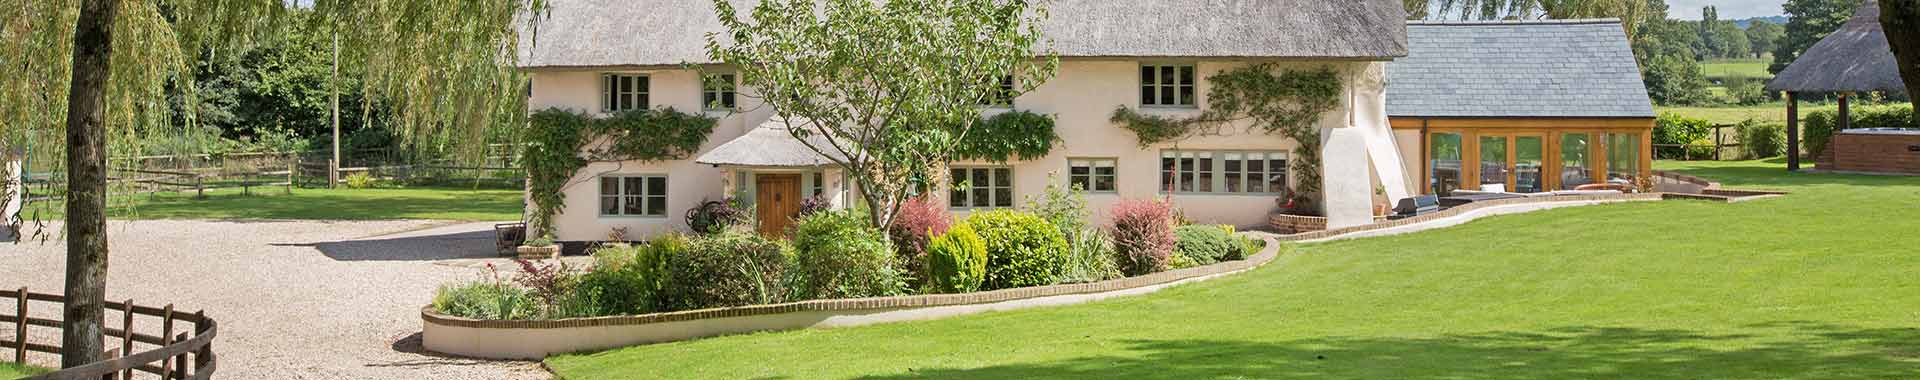 Luxury Self-Catering Cottages for 18 People